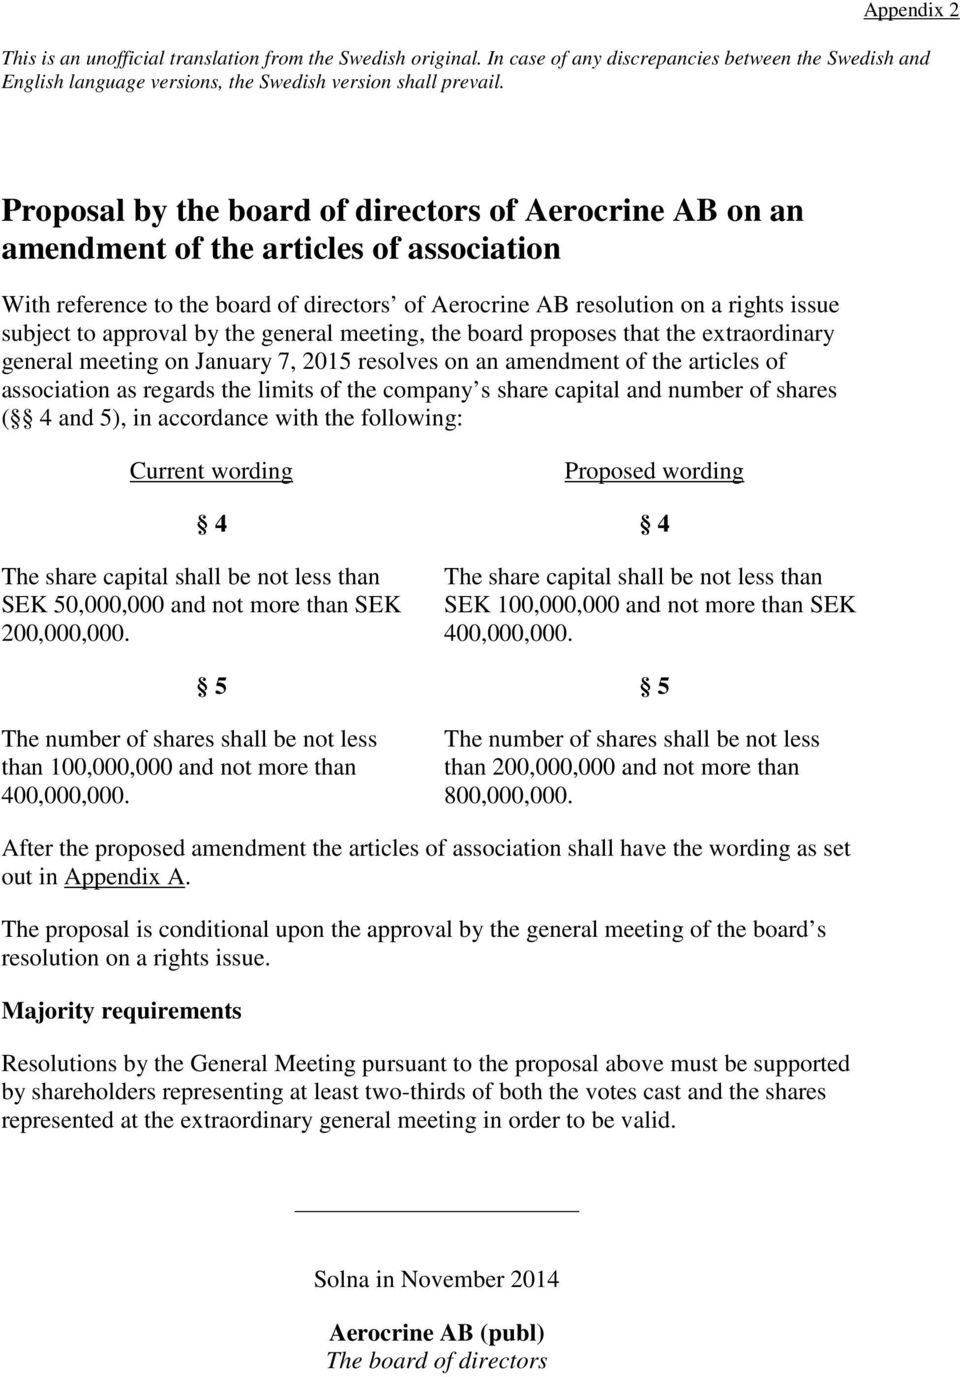 approval by the general meeting, the board proposes that the extraordinary general meeting on January 7, 2015 resolves on an amendment of the articles of association as regards the limits of the